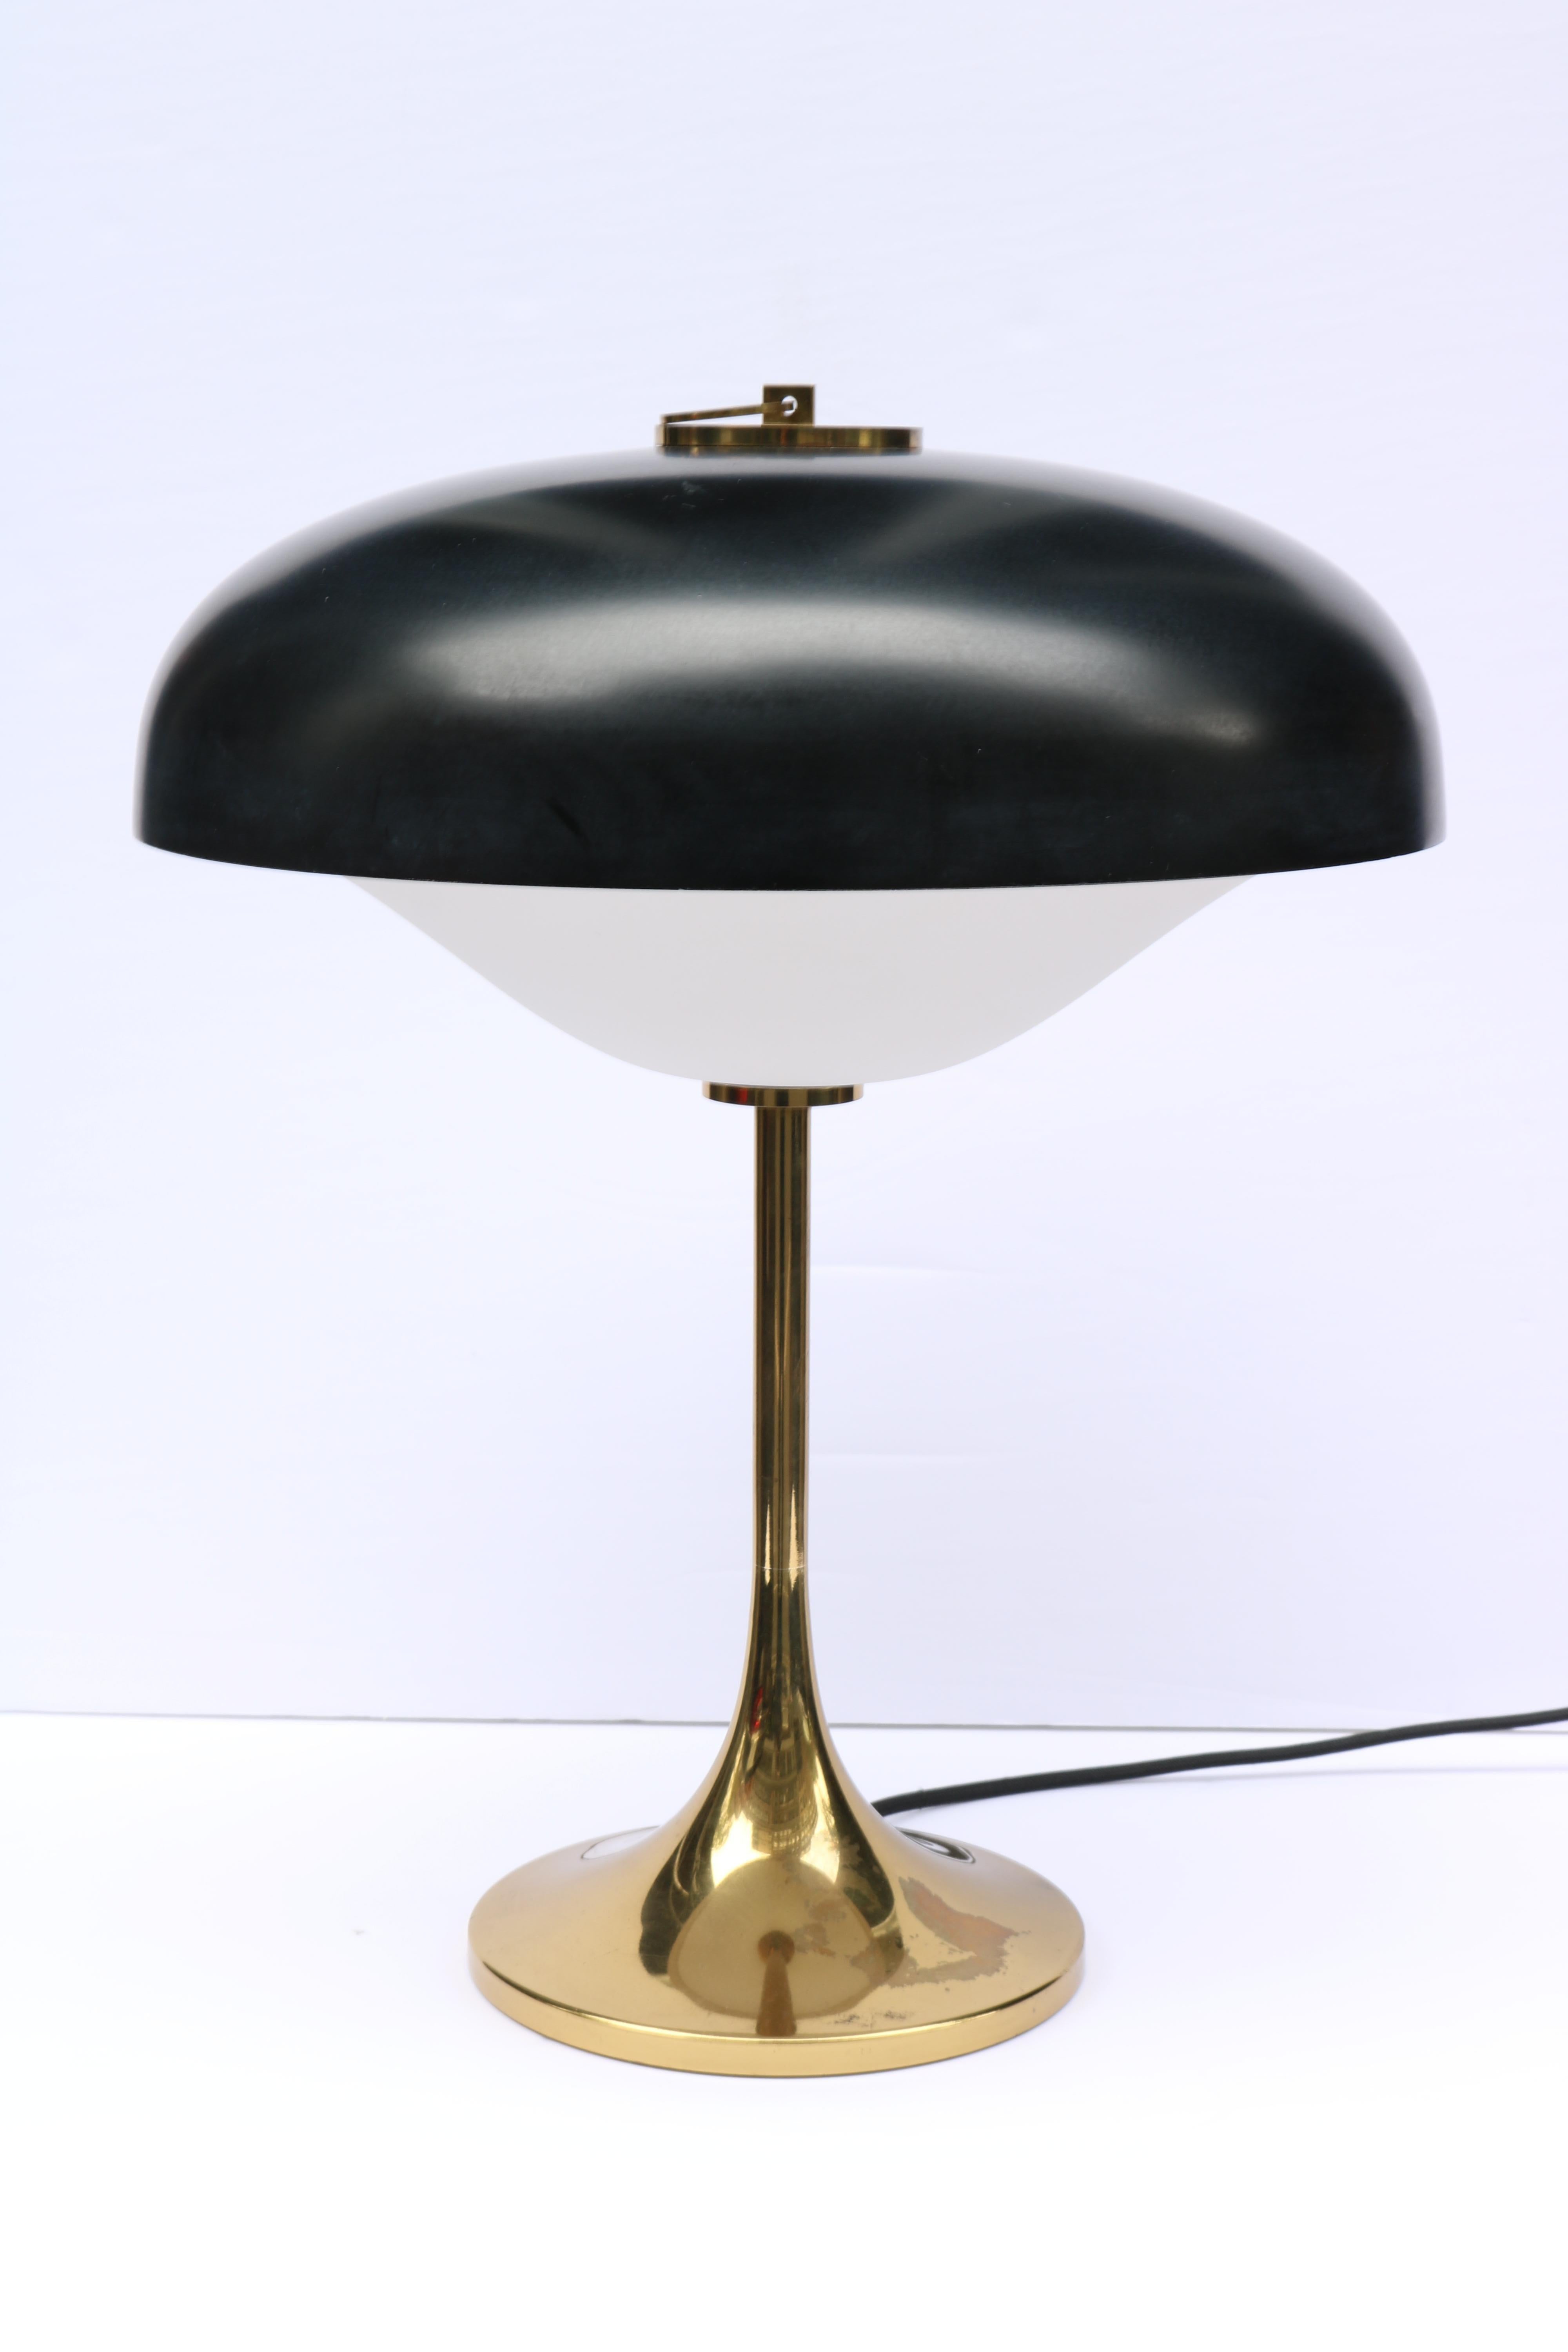 Italian Table lamp mod. 12827s by Gregotti, Meneghetti and Stoppino, Italy, circa 1960 For Sale